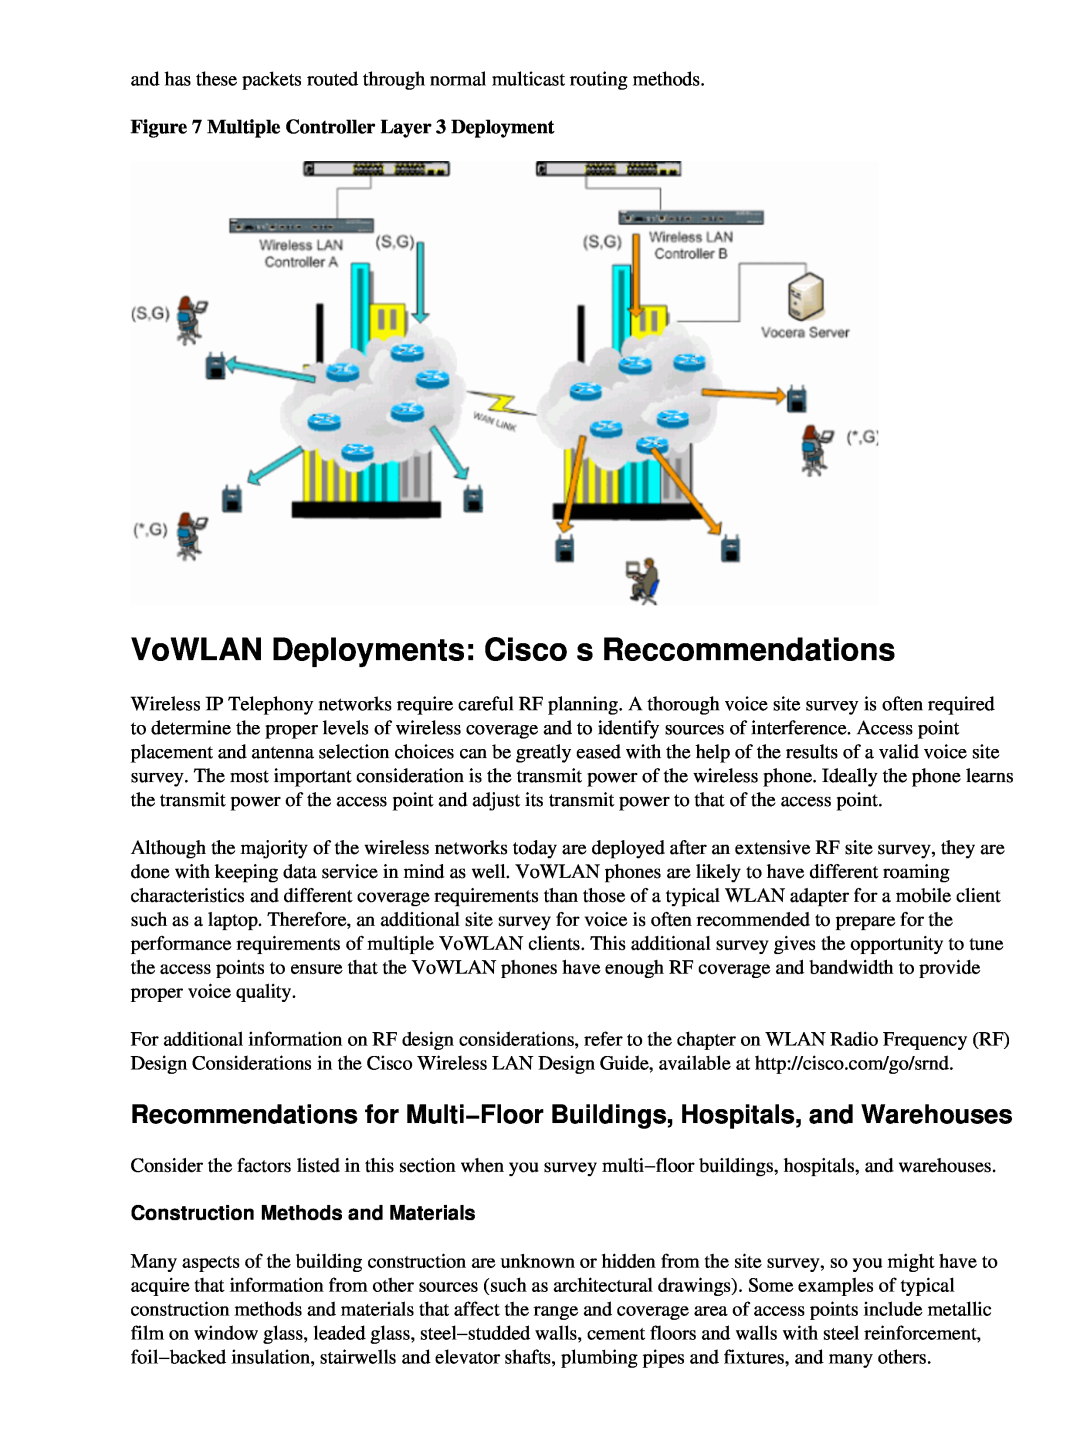 Cisco Systems 71642 manual VoWLAN Deployments Ciscos Reccommendations, Multiple Controller Layer 3 Deployment 